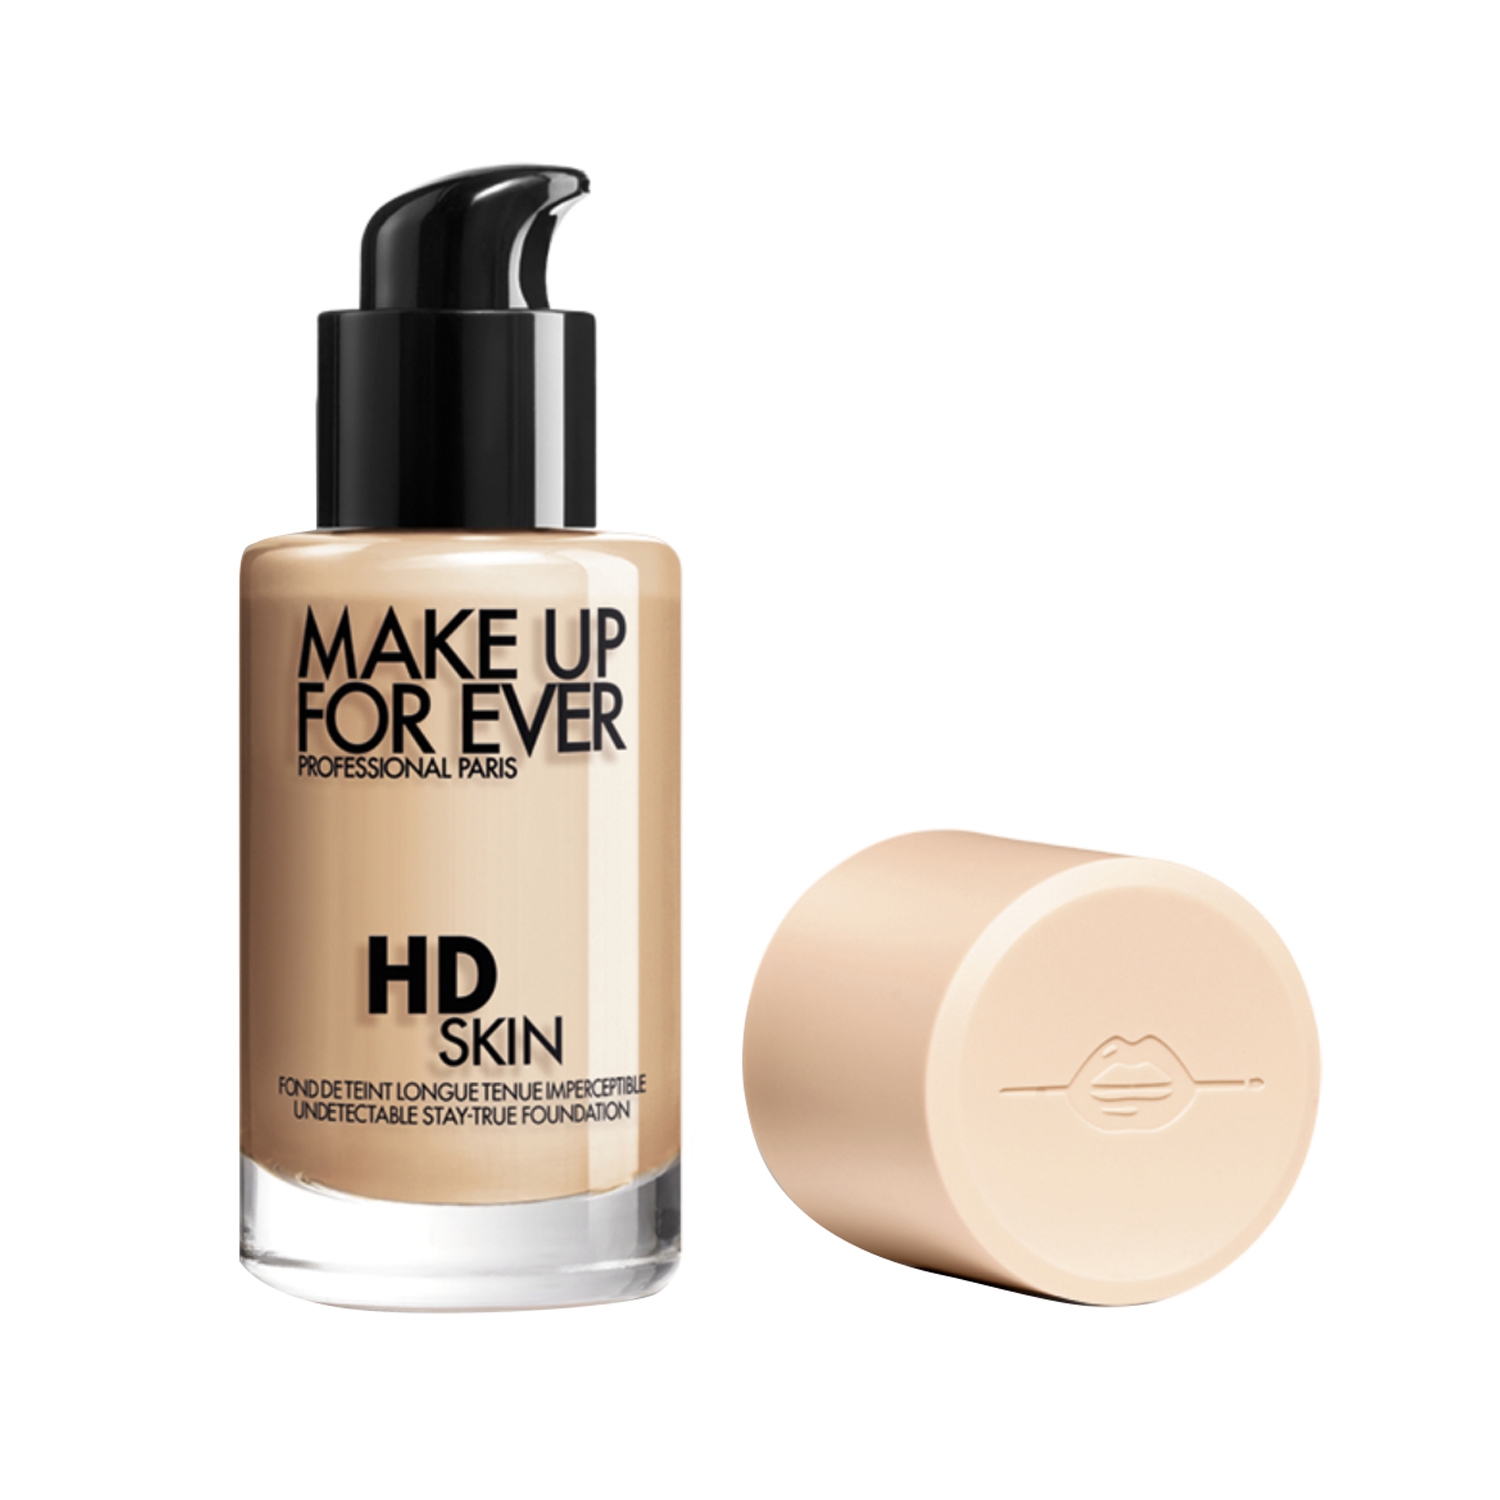 Make Up For Ever | Make Up For Ever Hd Skin Foundation-1N14 (Y245) (30ml)